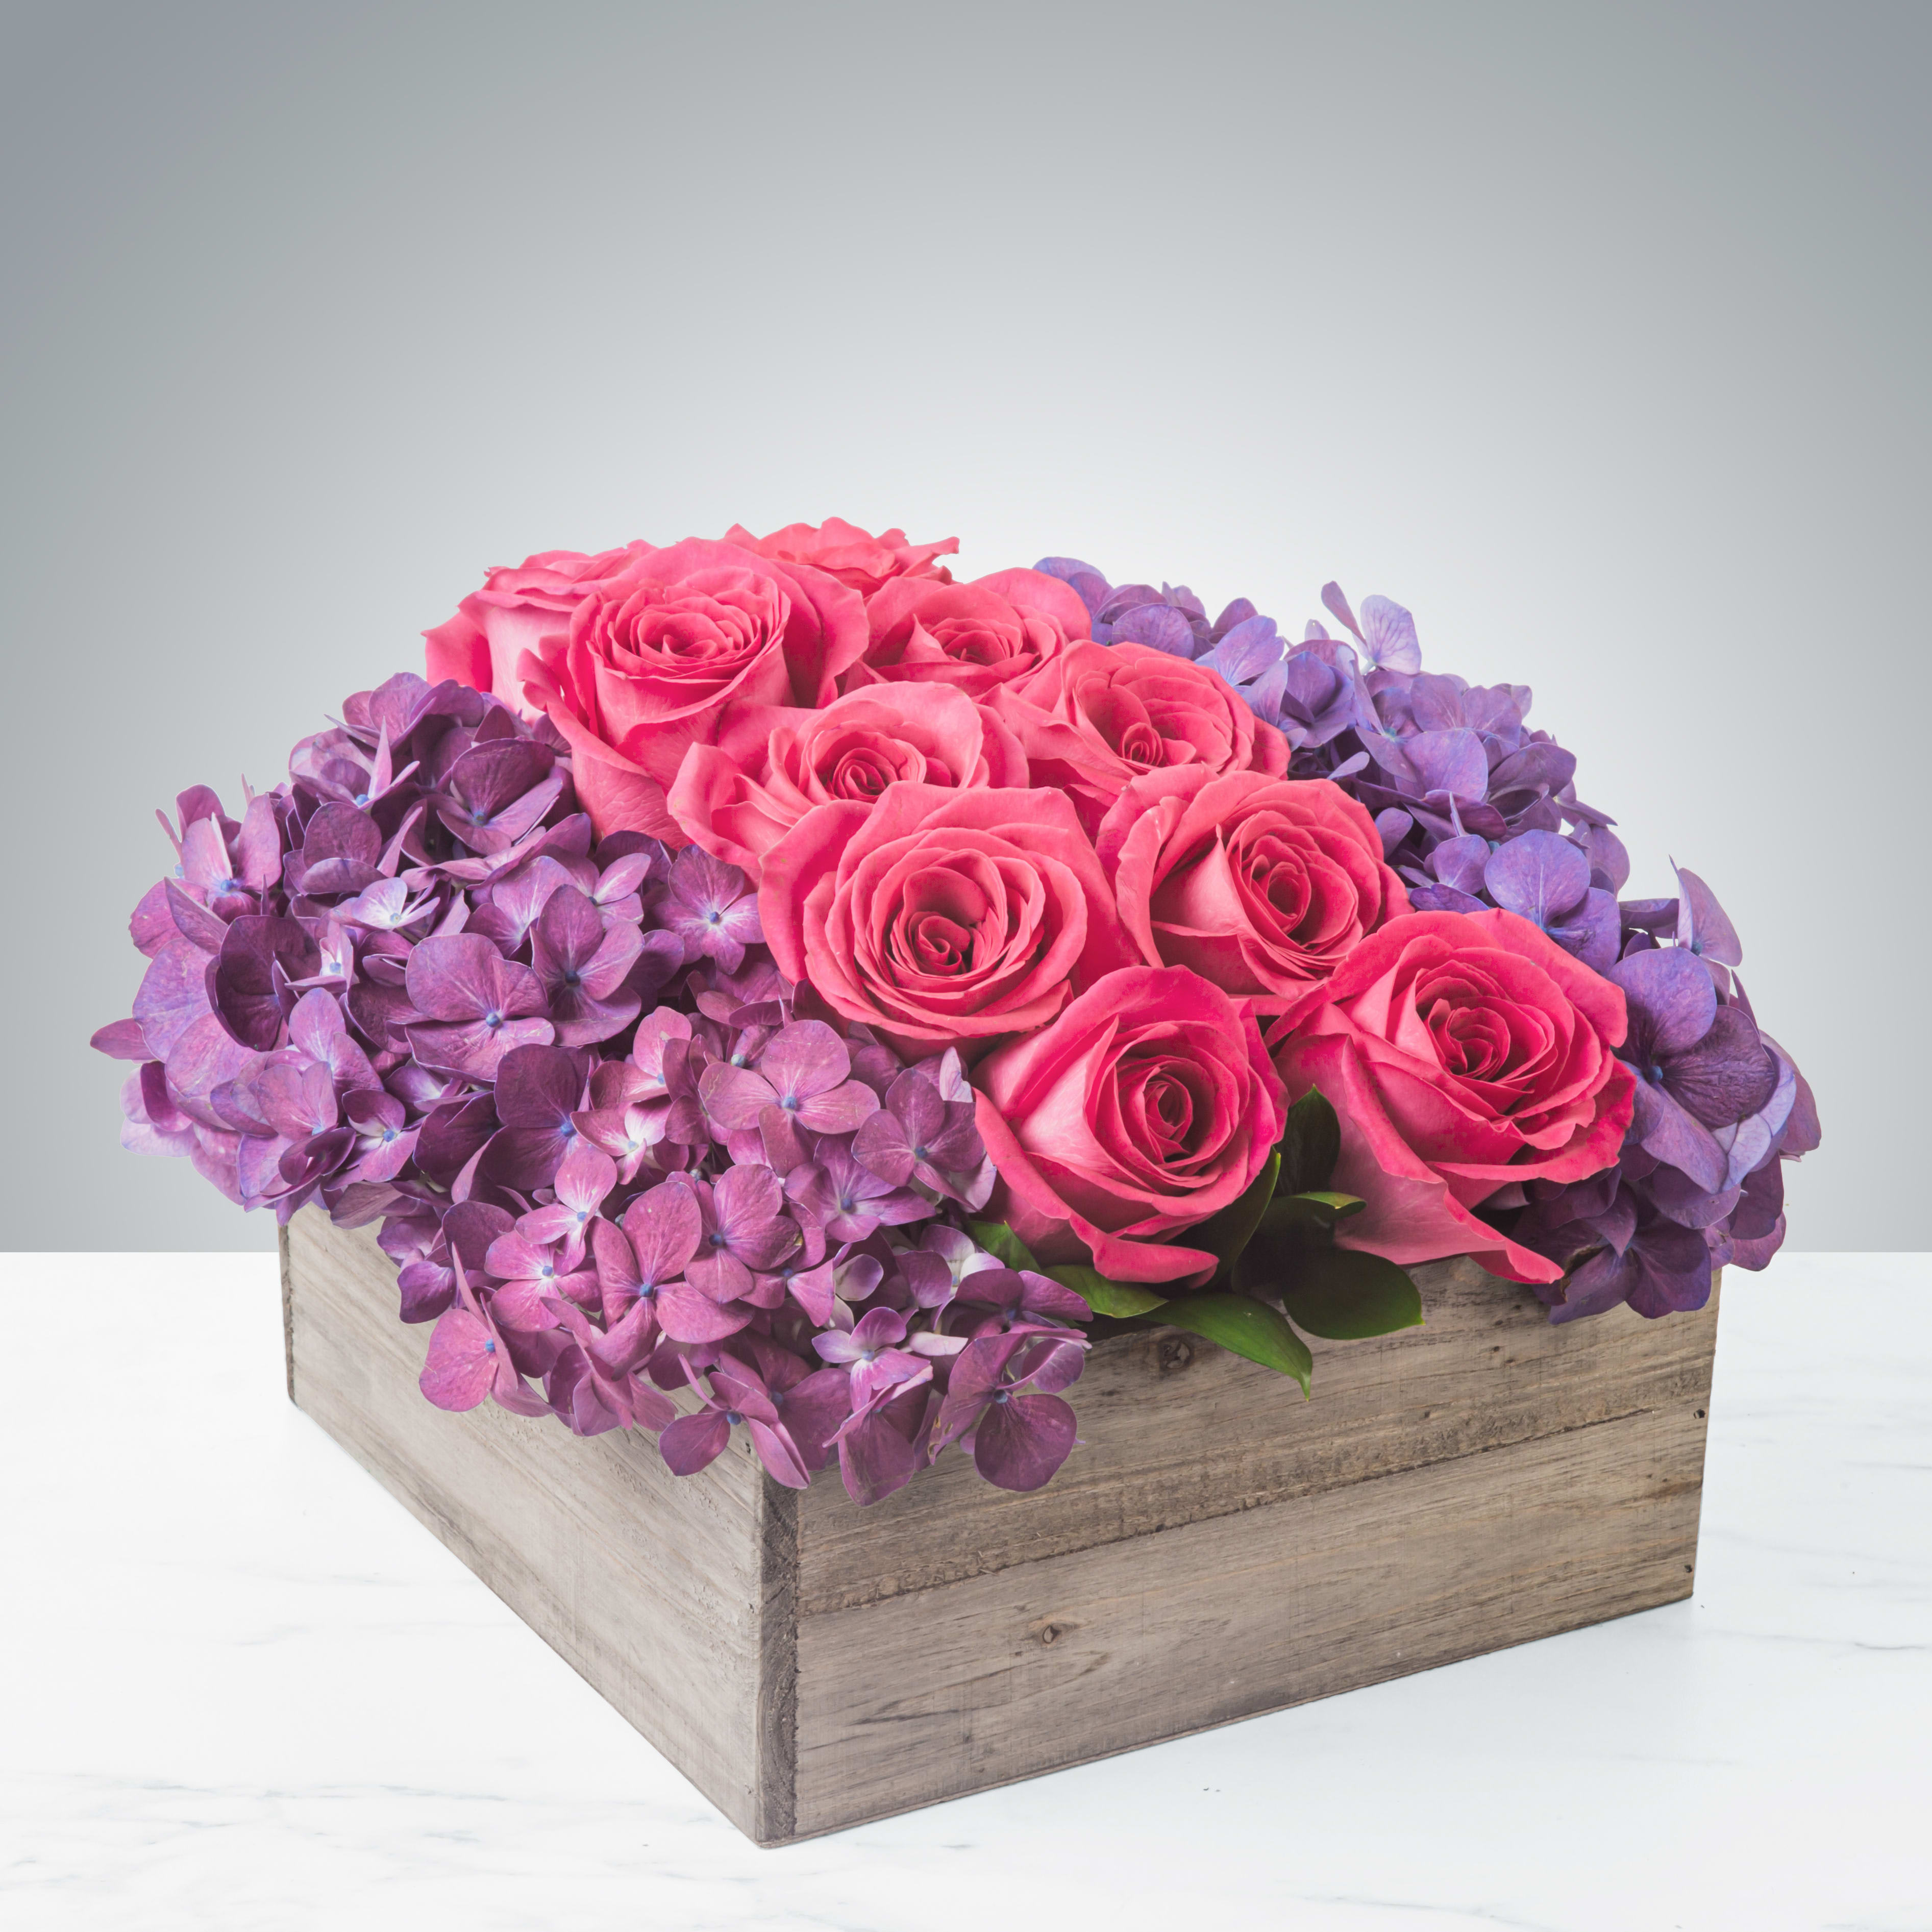 Modern Class - This large flower box is a full statement and brings color to any room. Featuring roses, hydrangeas and violets, the lines of the arrangement make it as chic as the vibrant colors make it dramatic.   Substitutions may be necessary to ensure your arrangement or specialty gift is delivered in a timely manner. The utmost care and attention is given to your order to ensure that it is as similar as possible to the requested item.   APPROXIMATE DIMENSIONS 12&quot; W X 12&quot; L X 6&quot; H